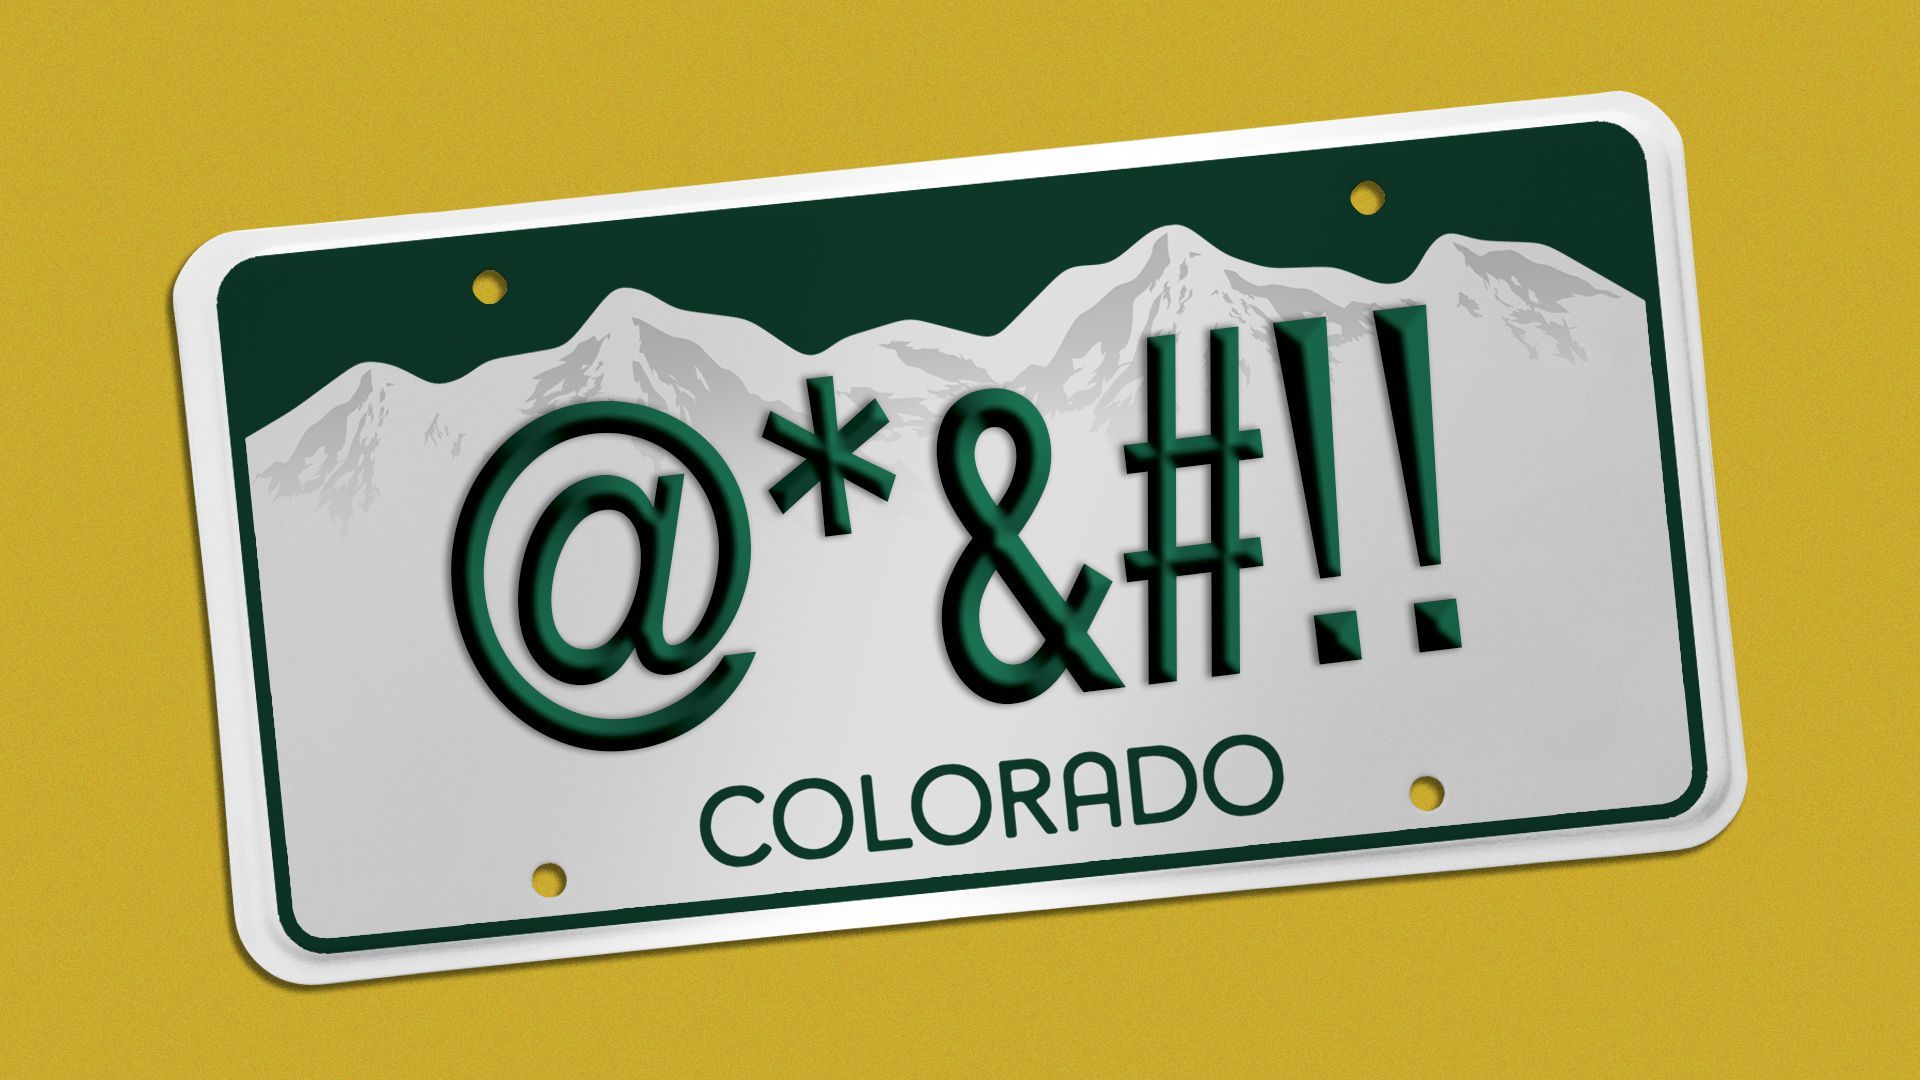 Illustration of a Colorado license plate with symbols implying a swear word.